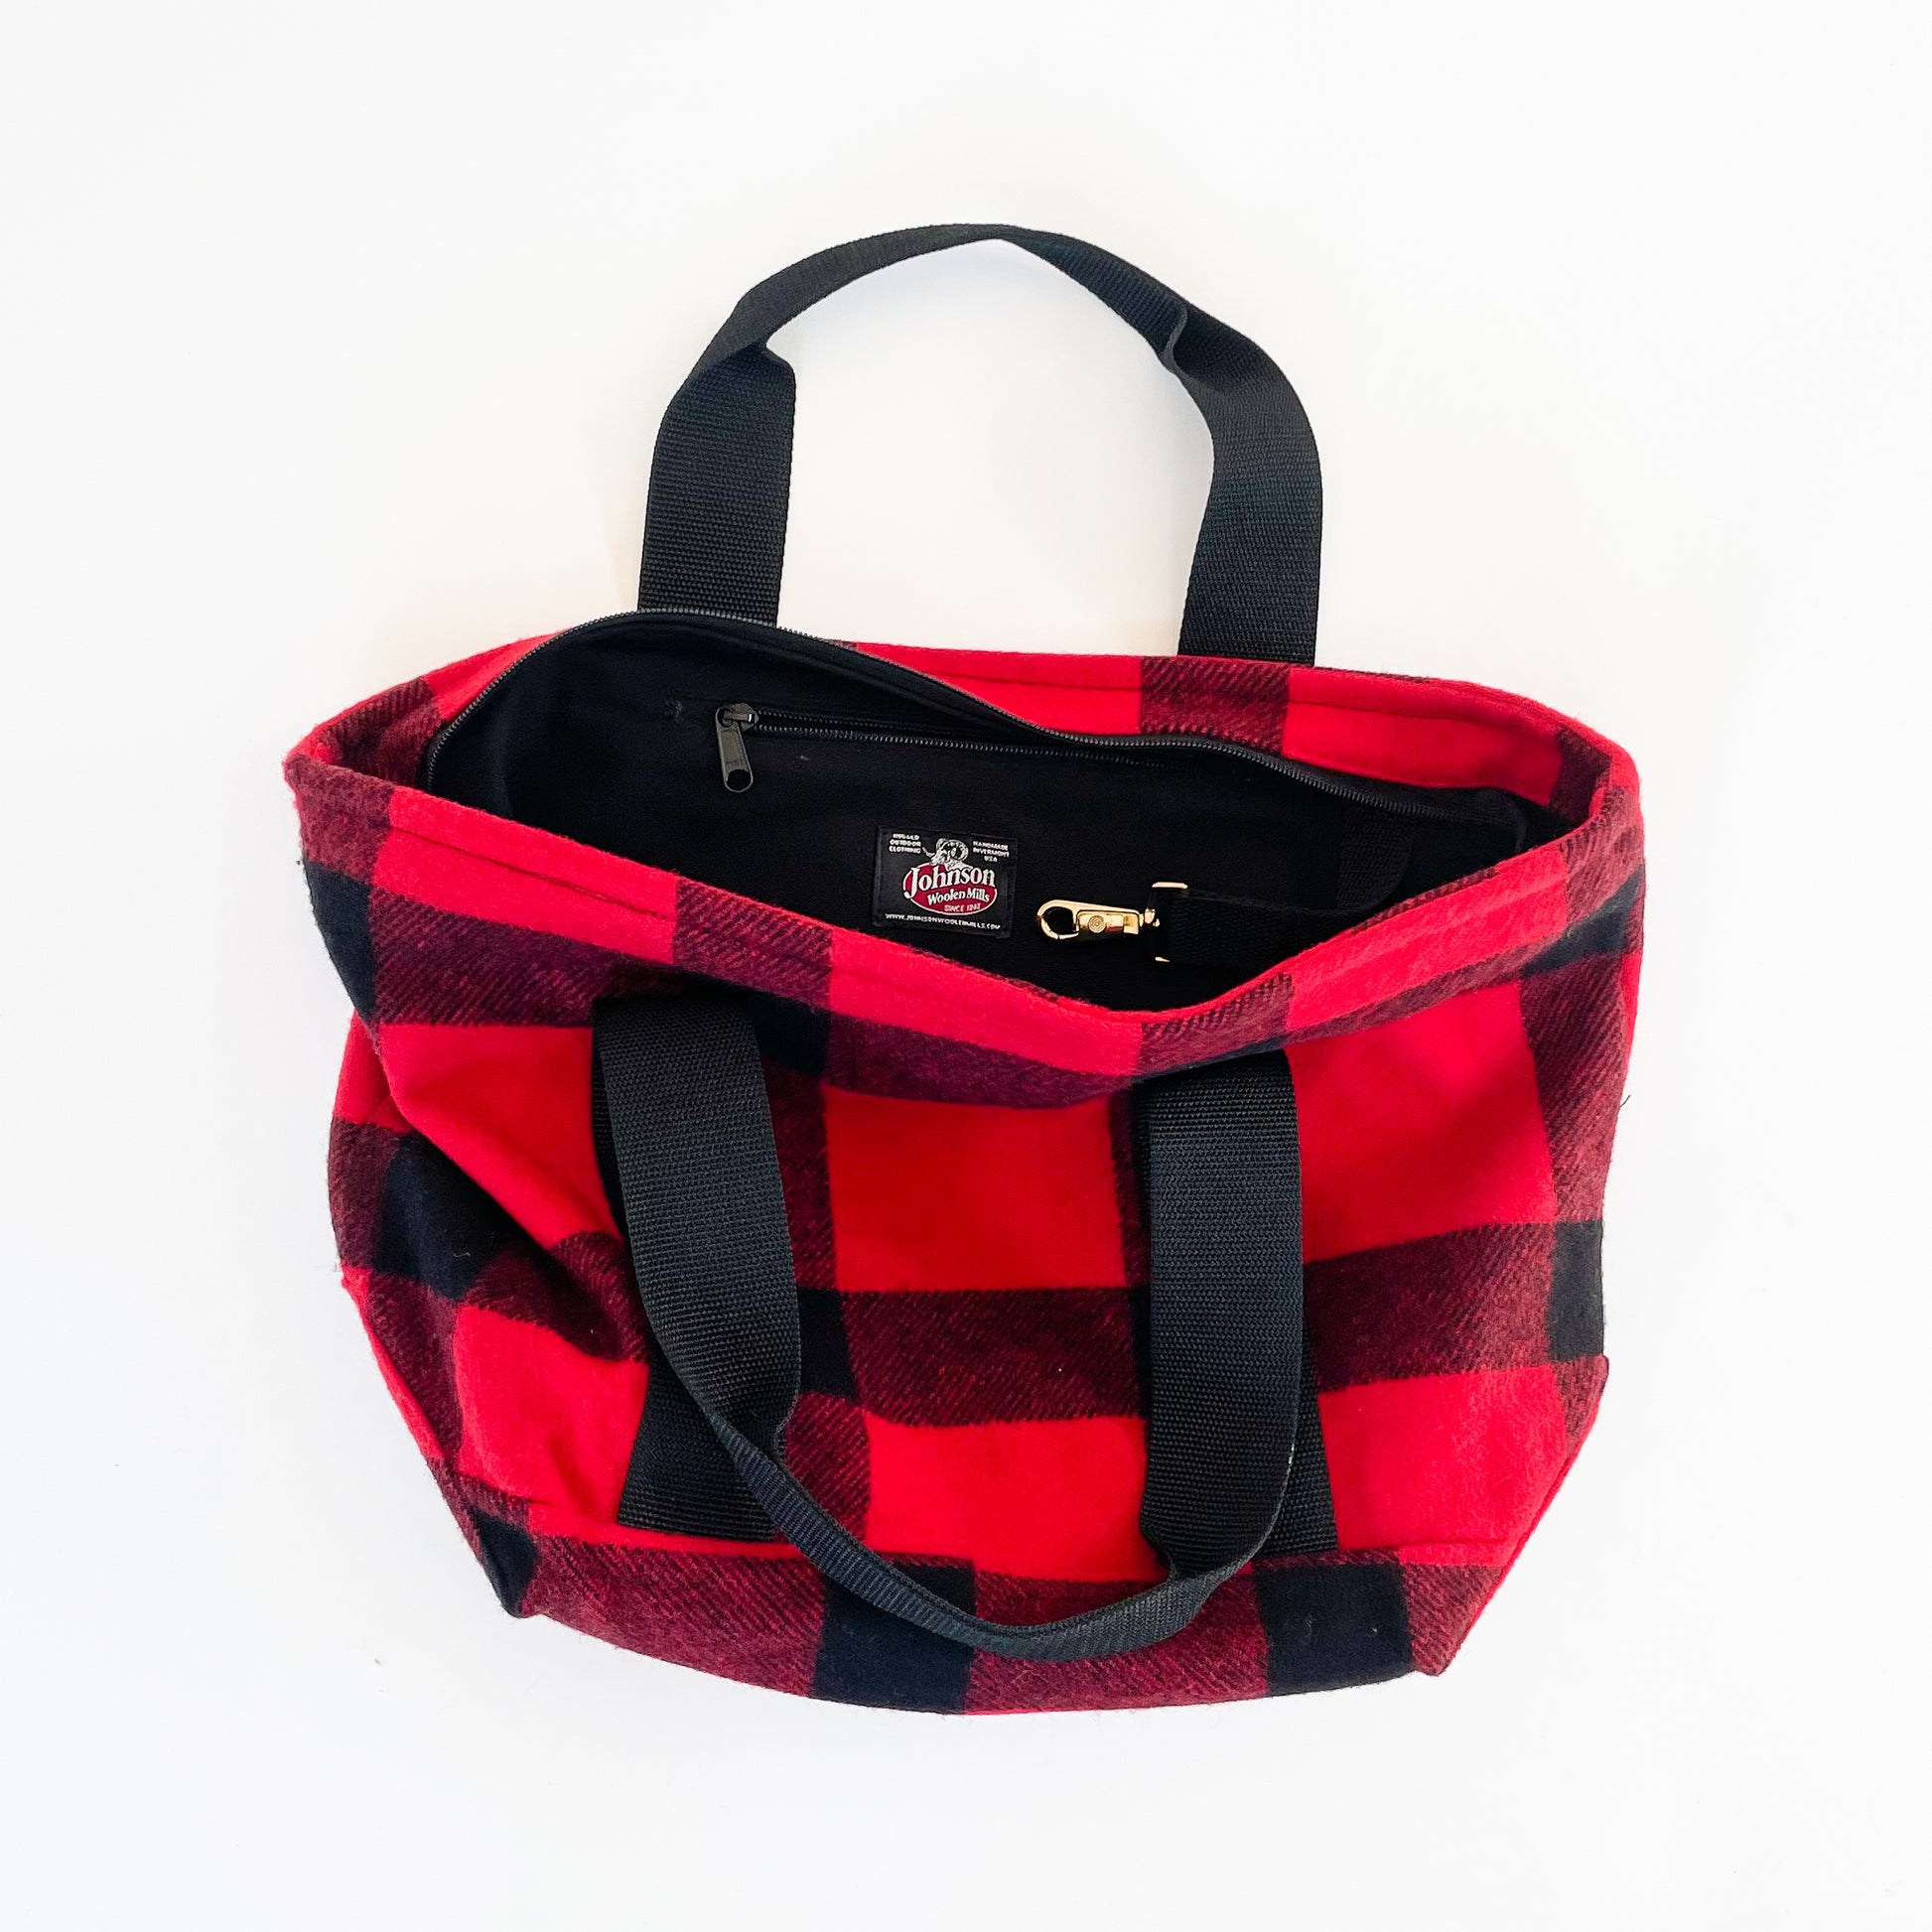 Wool bucket tote bag, large red and black plaid, shows full zipper top with inside pocket and key holder, and nylon straps